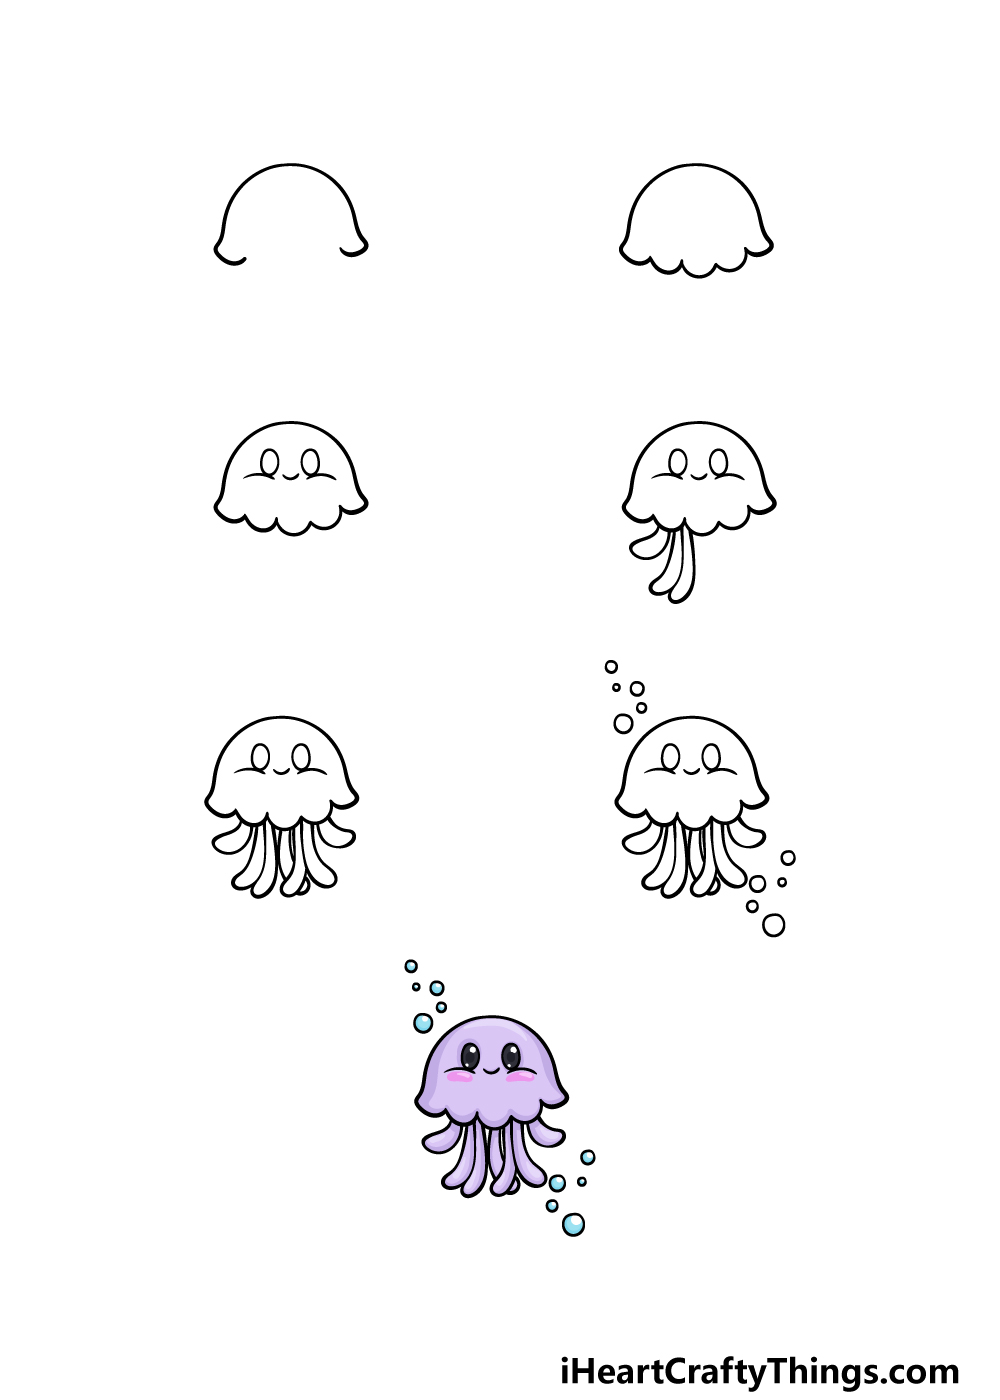 How to Draw A Cartoon Jellyfish in 7 steps